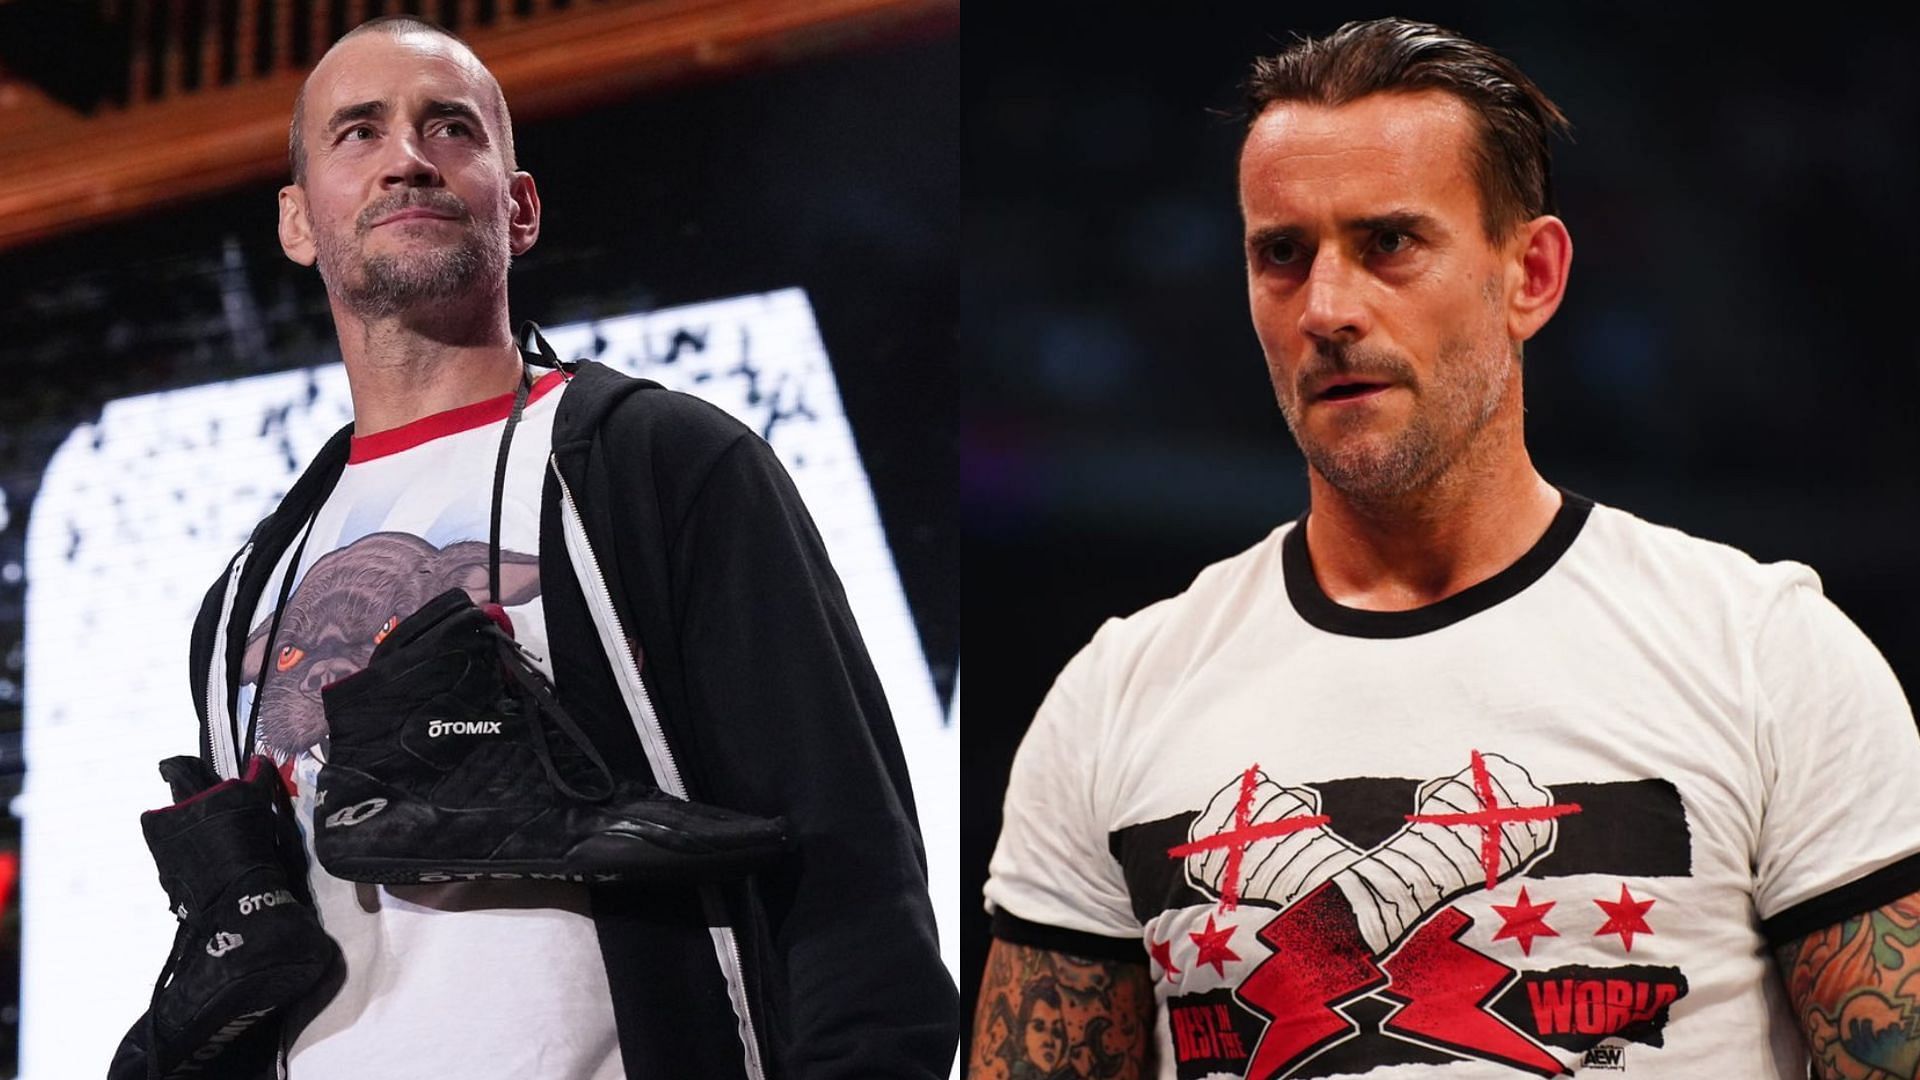 CM Punk is a controversial star in professional wrestling.